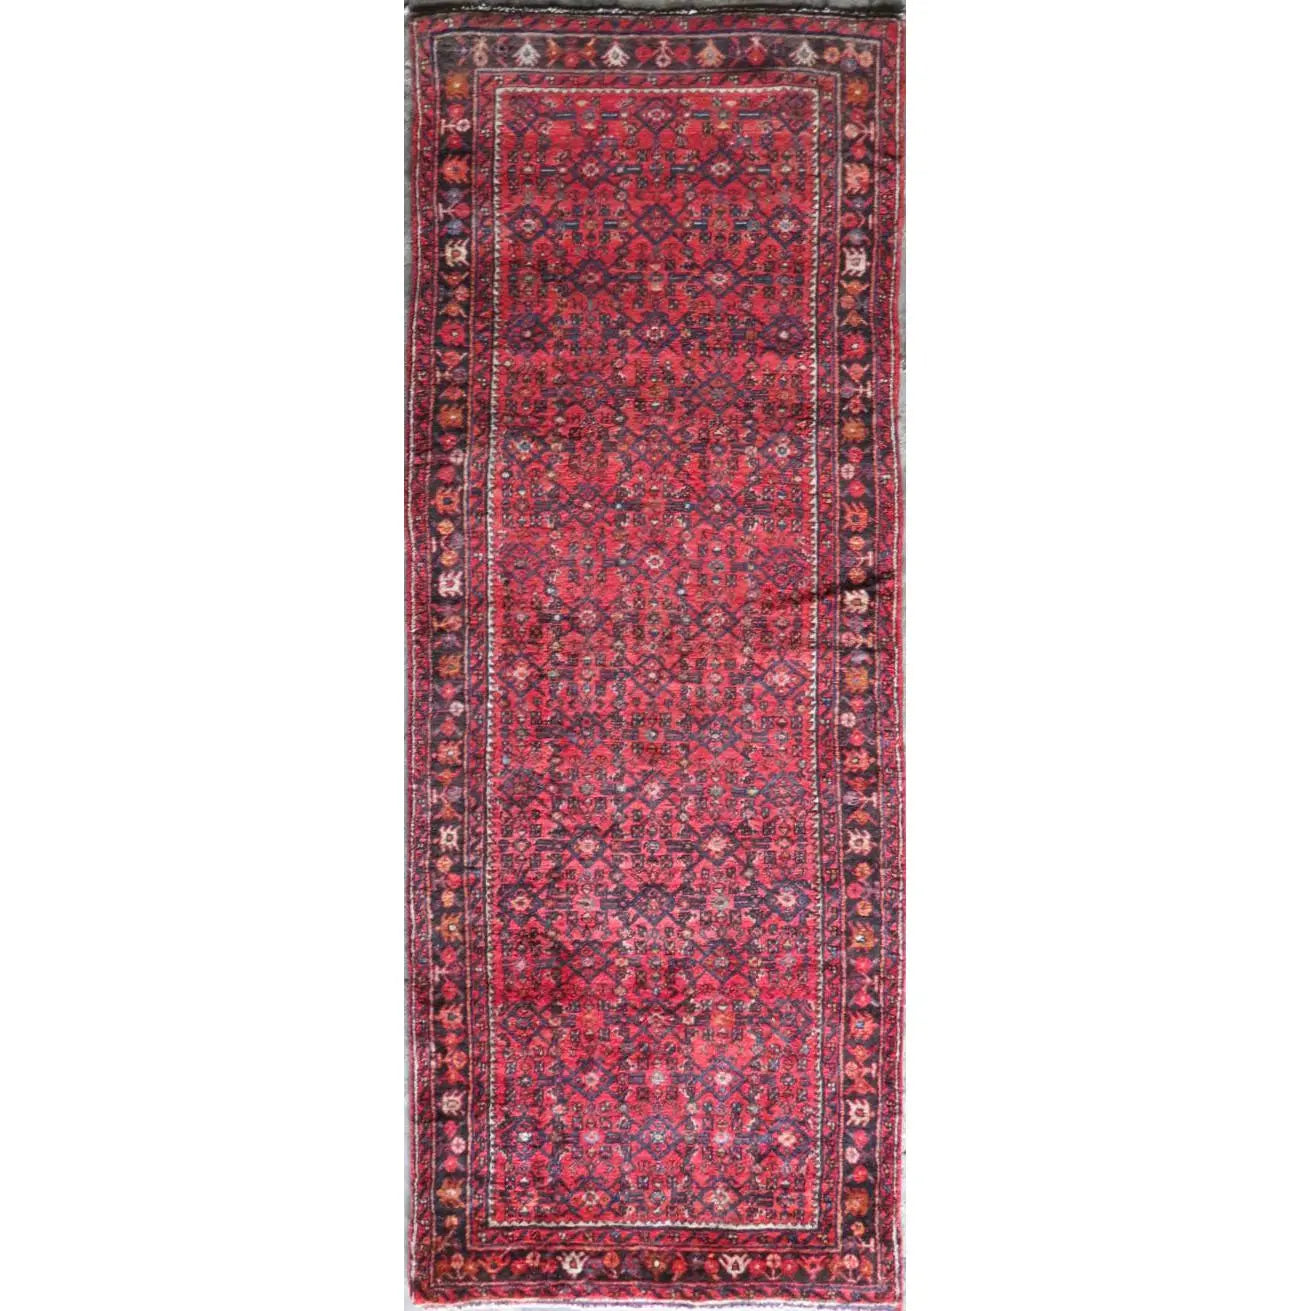 Hand-Knotted Persian Wool Rug _ Luxurious Vintage Design, 19'1" x 3'4", Artisan Crafted